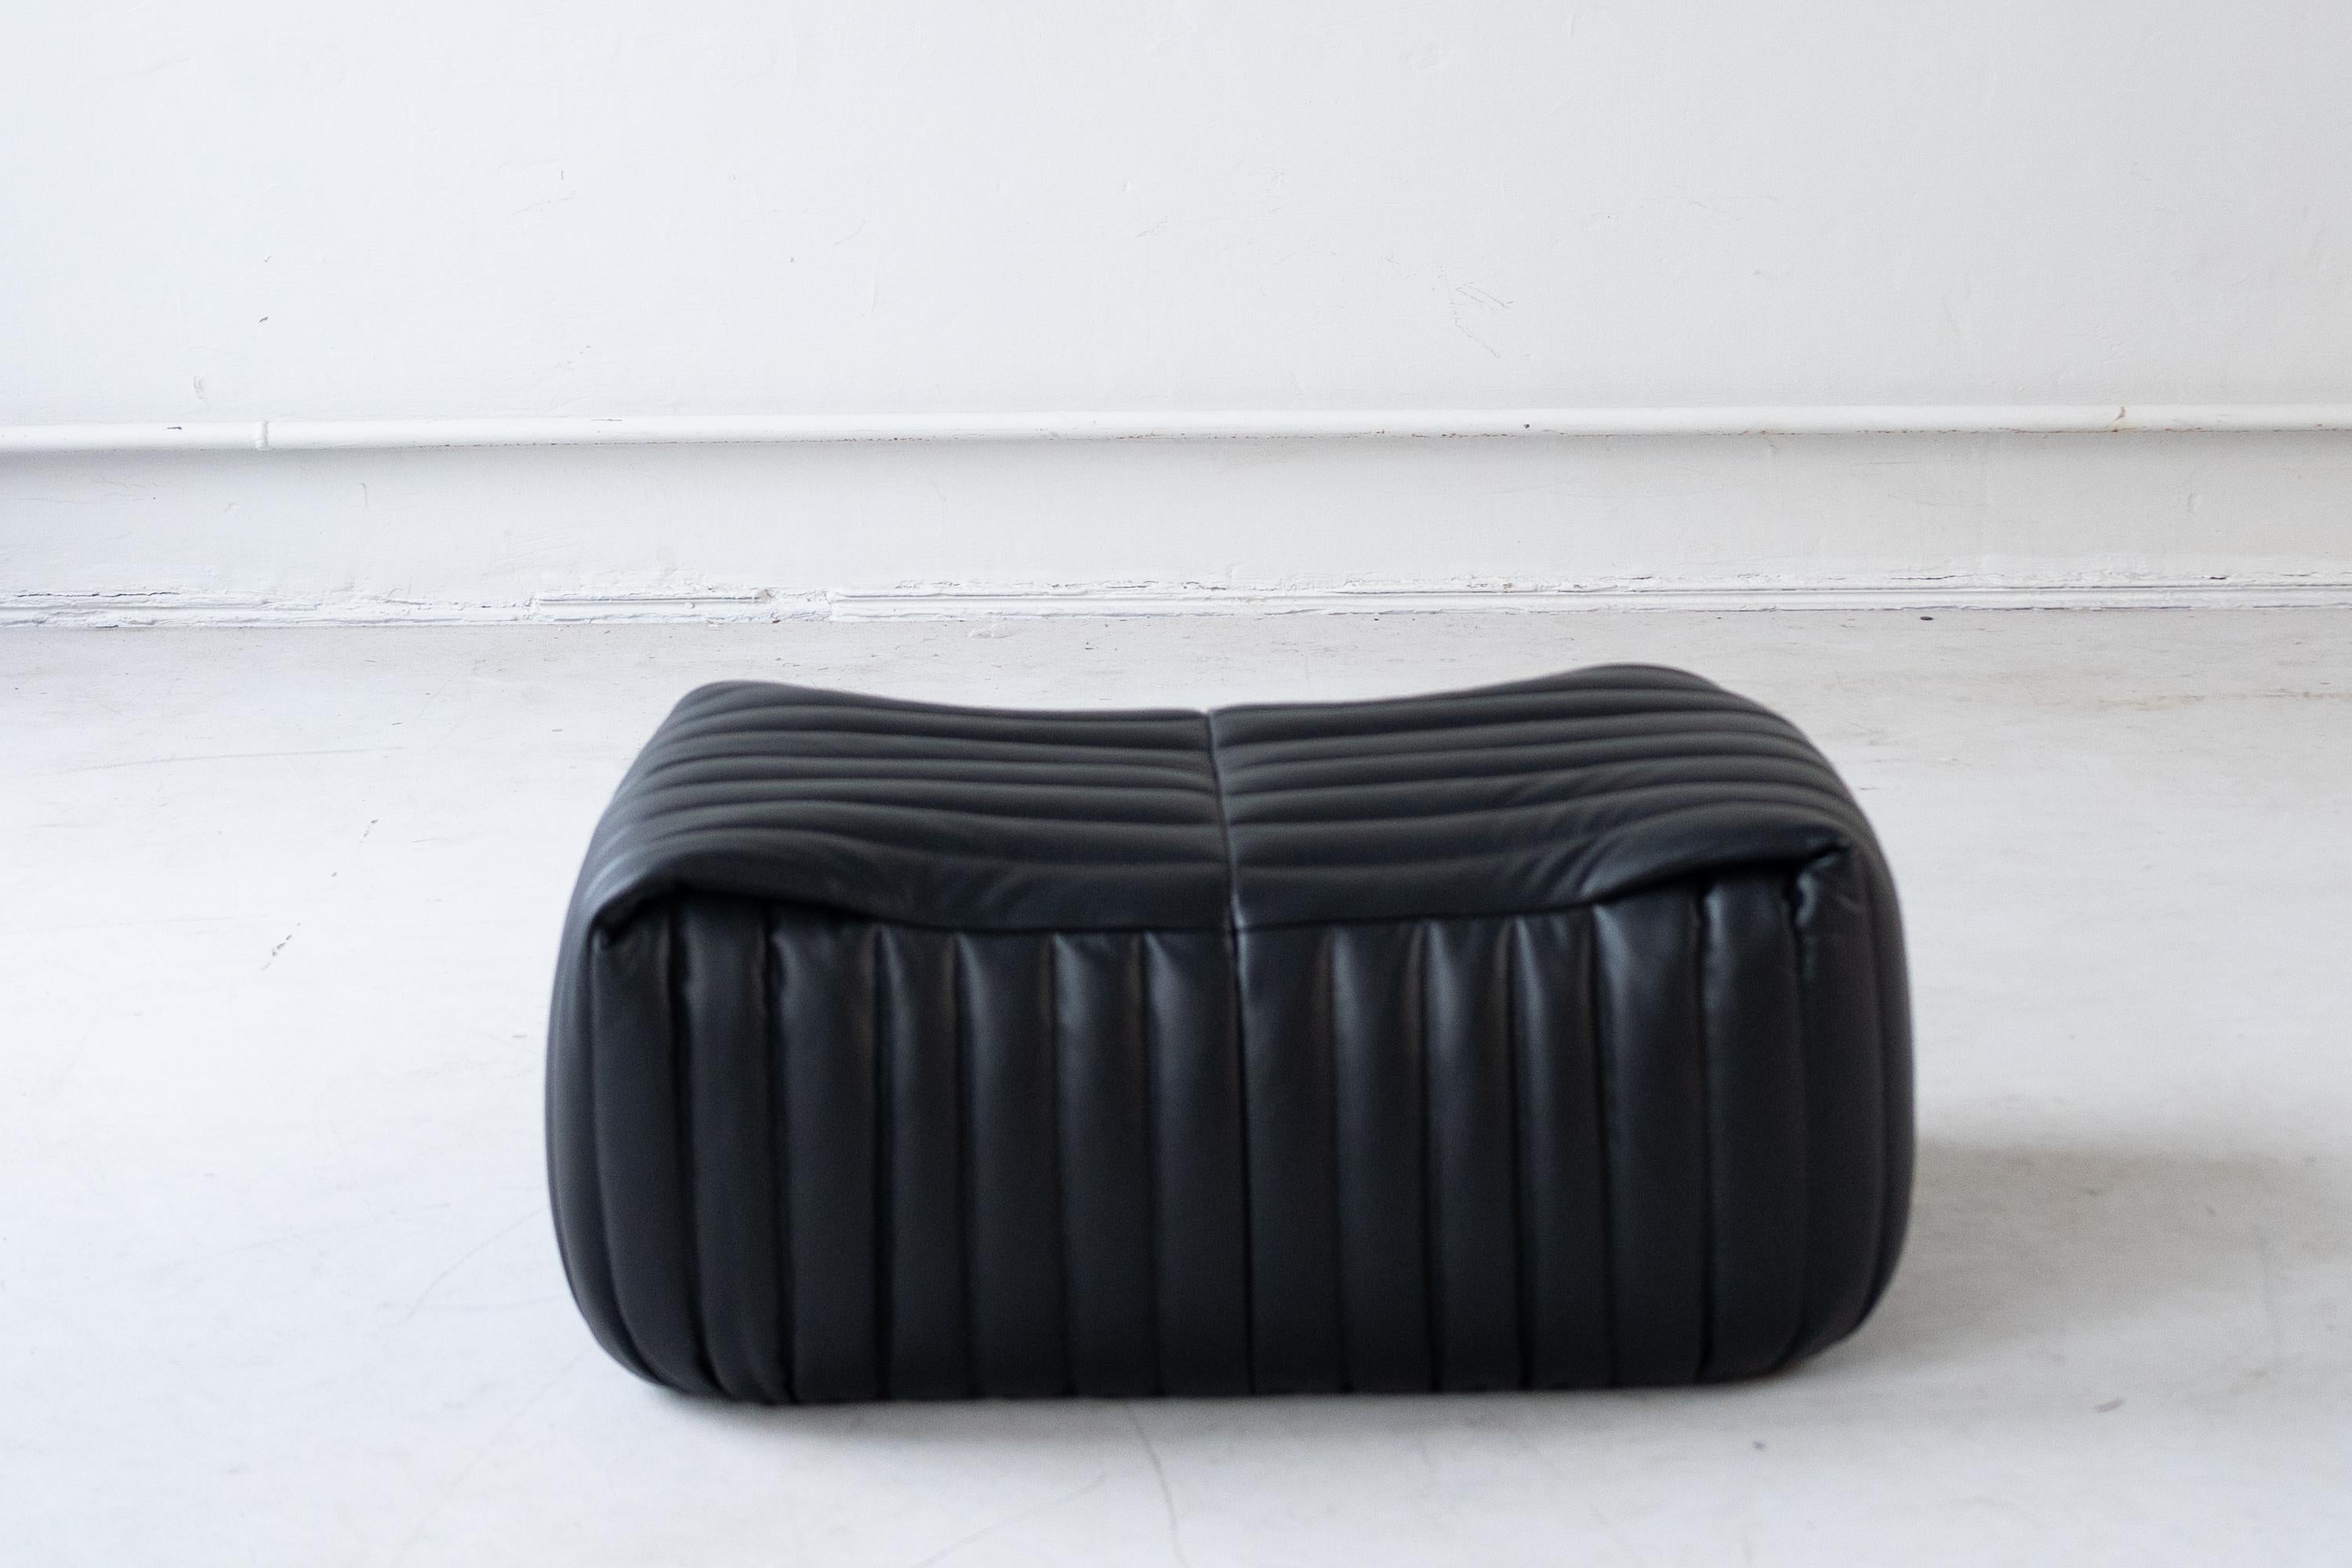  Sandra sofa  designed by Annie Hiéronimus for Cinna after she joined the Roset Bureau d’Etudes in 1976. 
 The inside of the sofa consists entirely of polyether foam and is, therefore, feather-light and above all very comfortable. 
this set is made